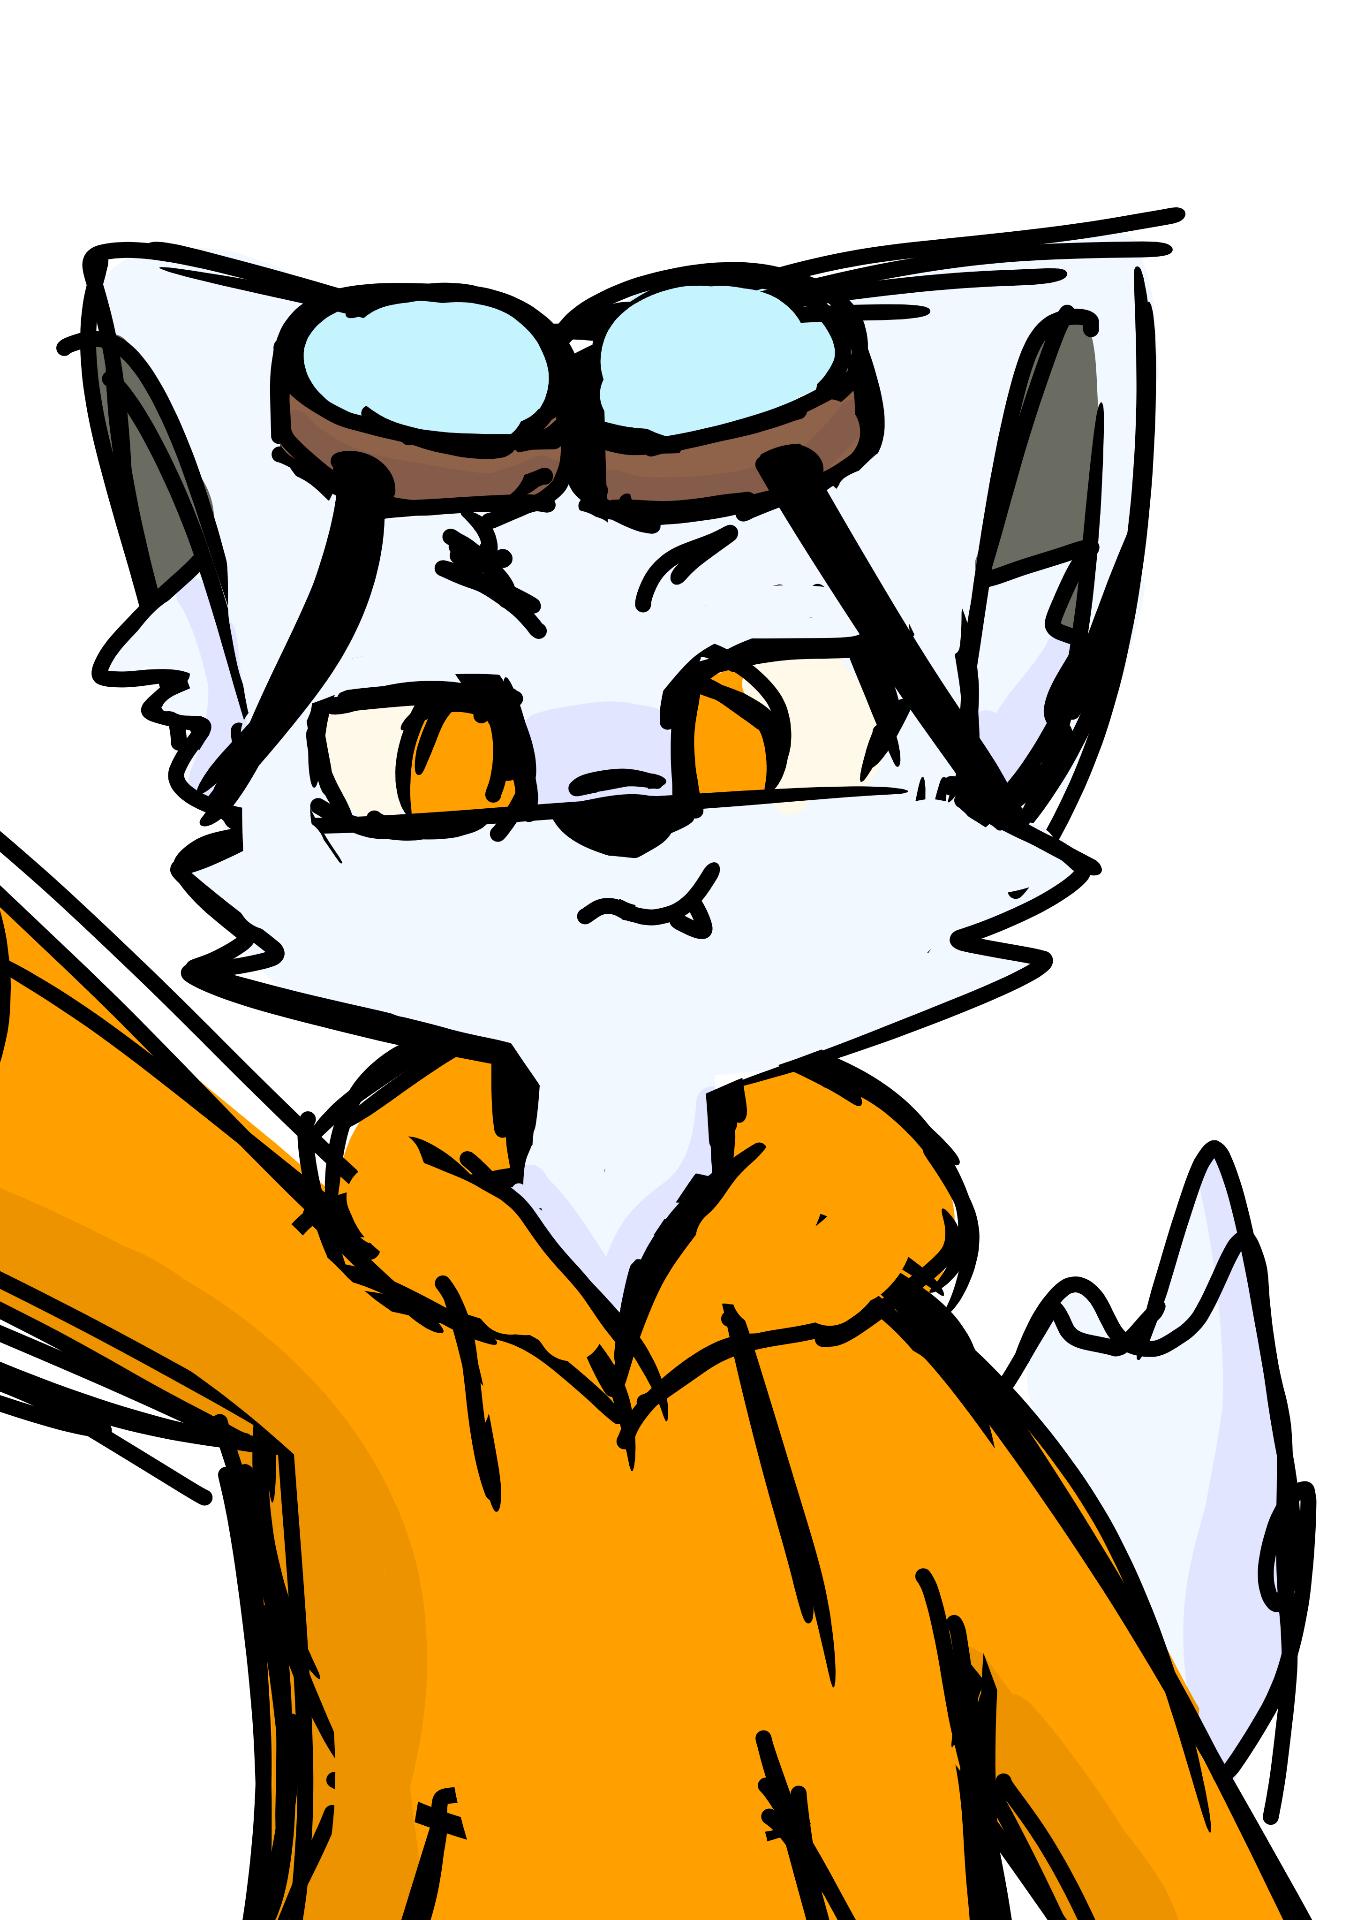 Wiikifox looking at you with a snarky face, hand on the wall